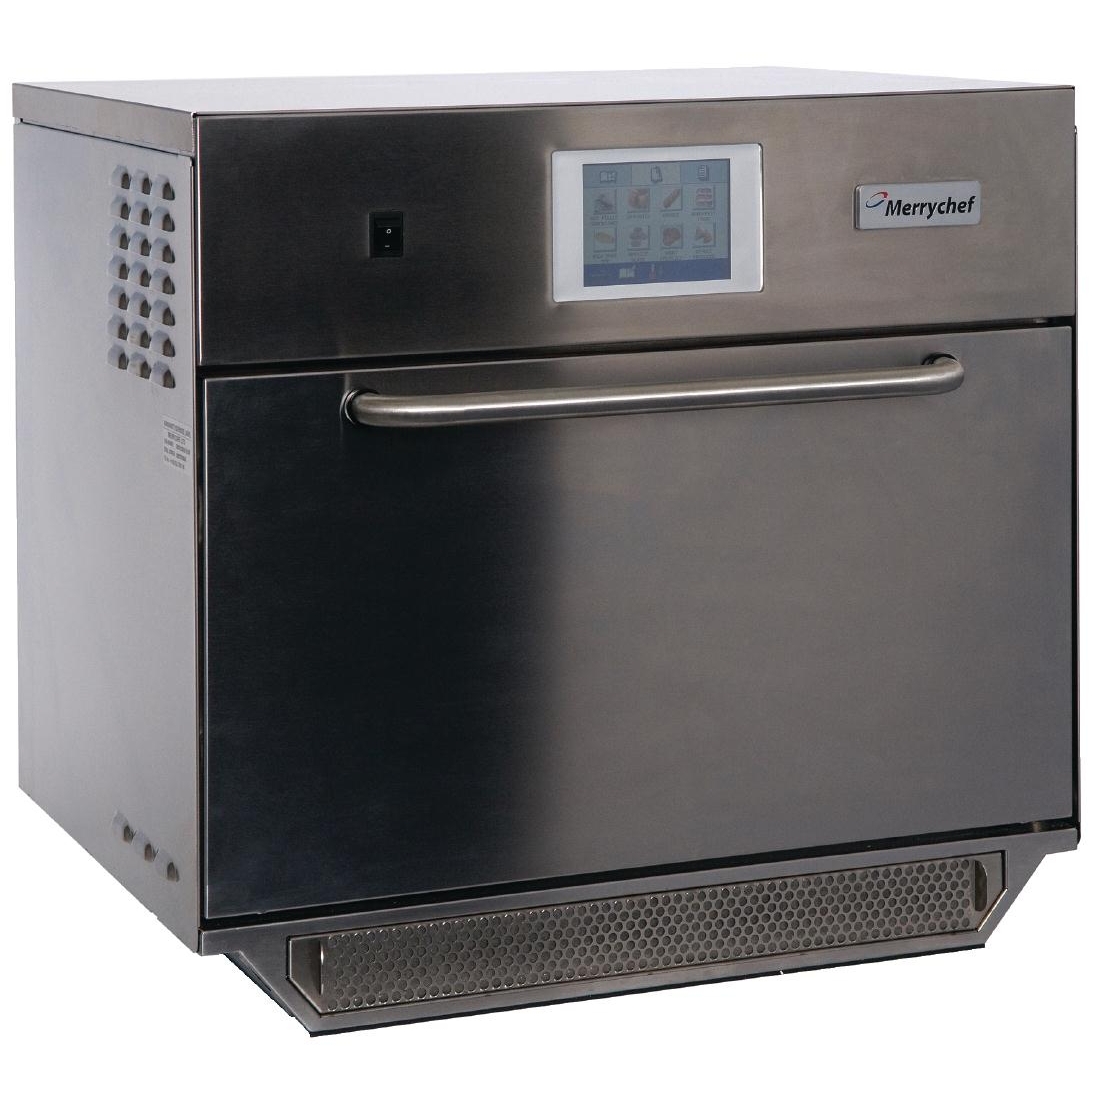 Merrychef eikon easyTouch Accelerated Cooking Electric Oven e5 (NSV)